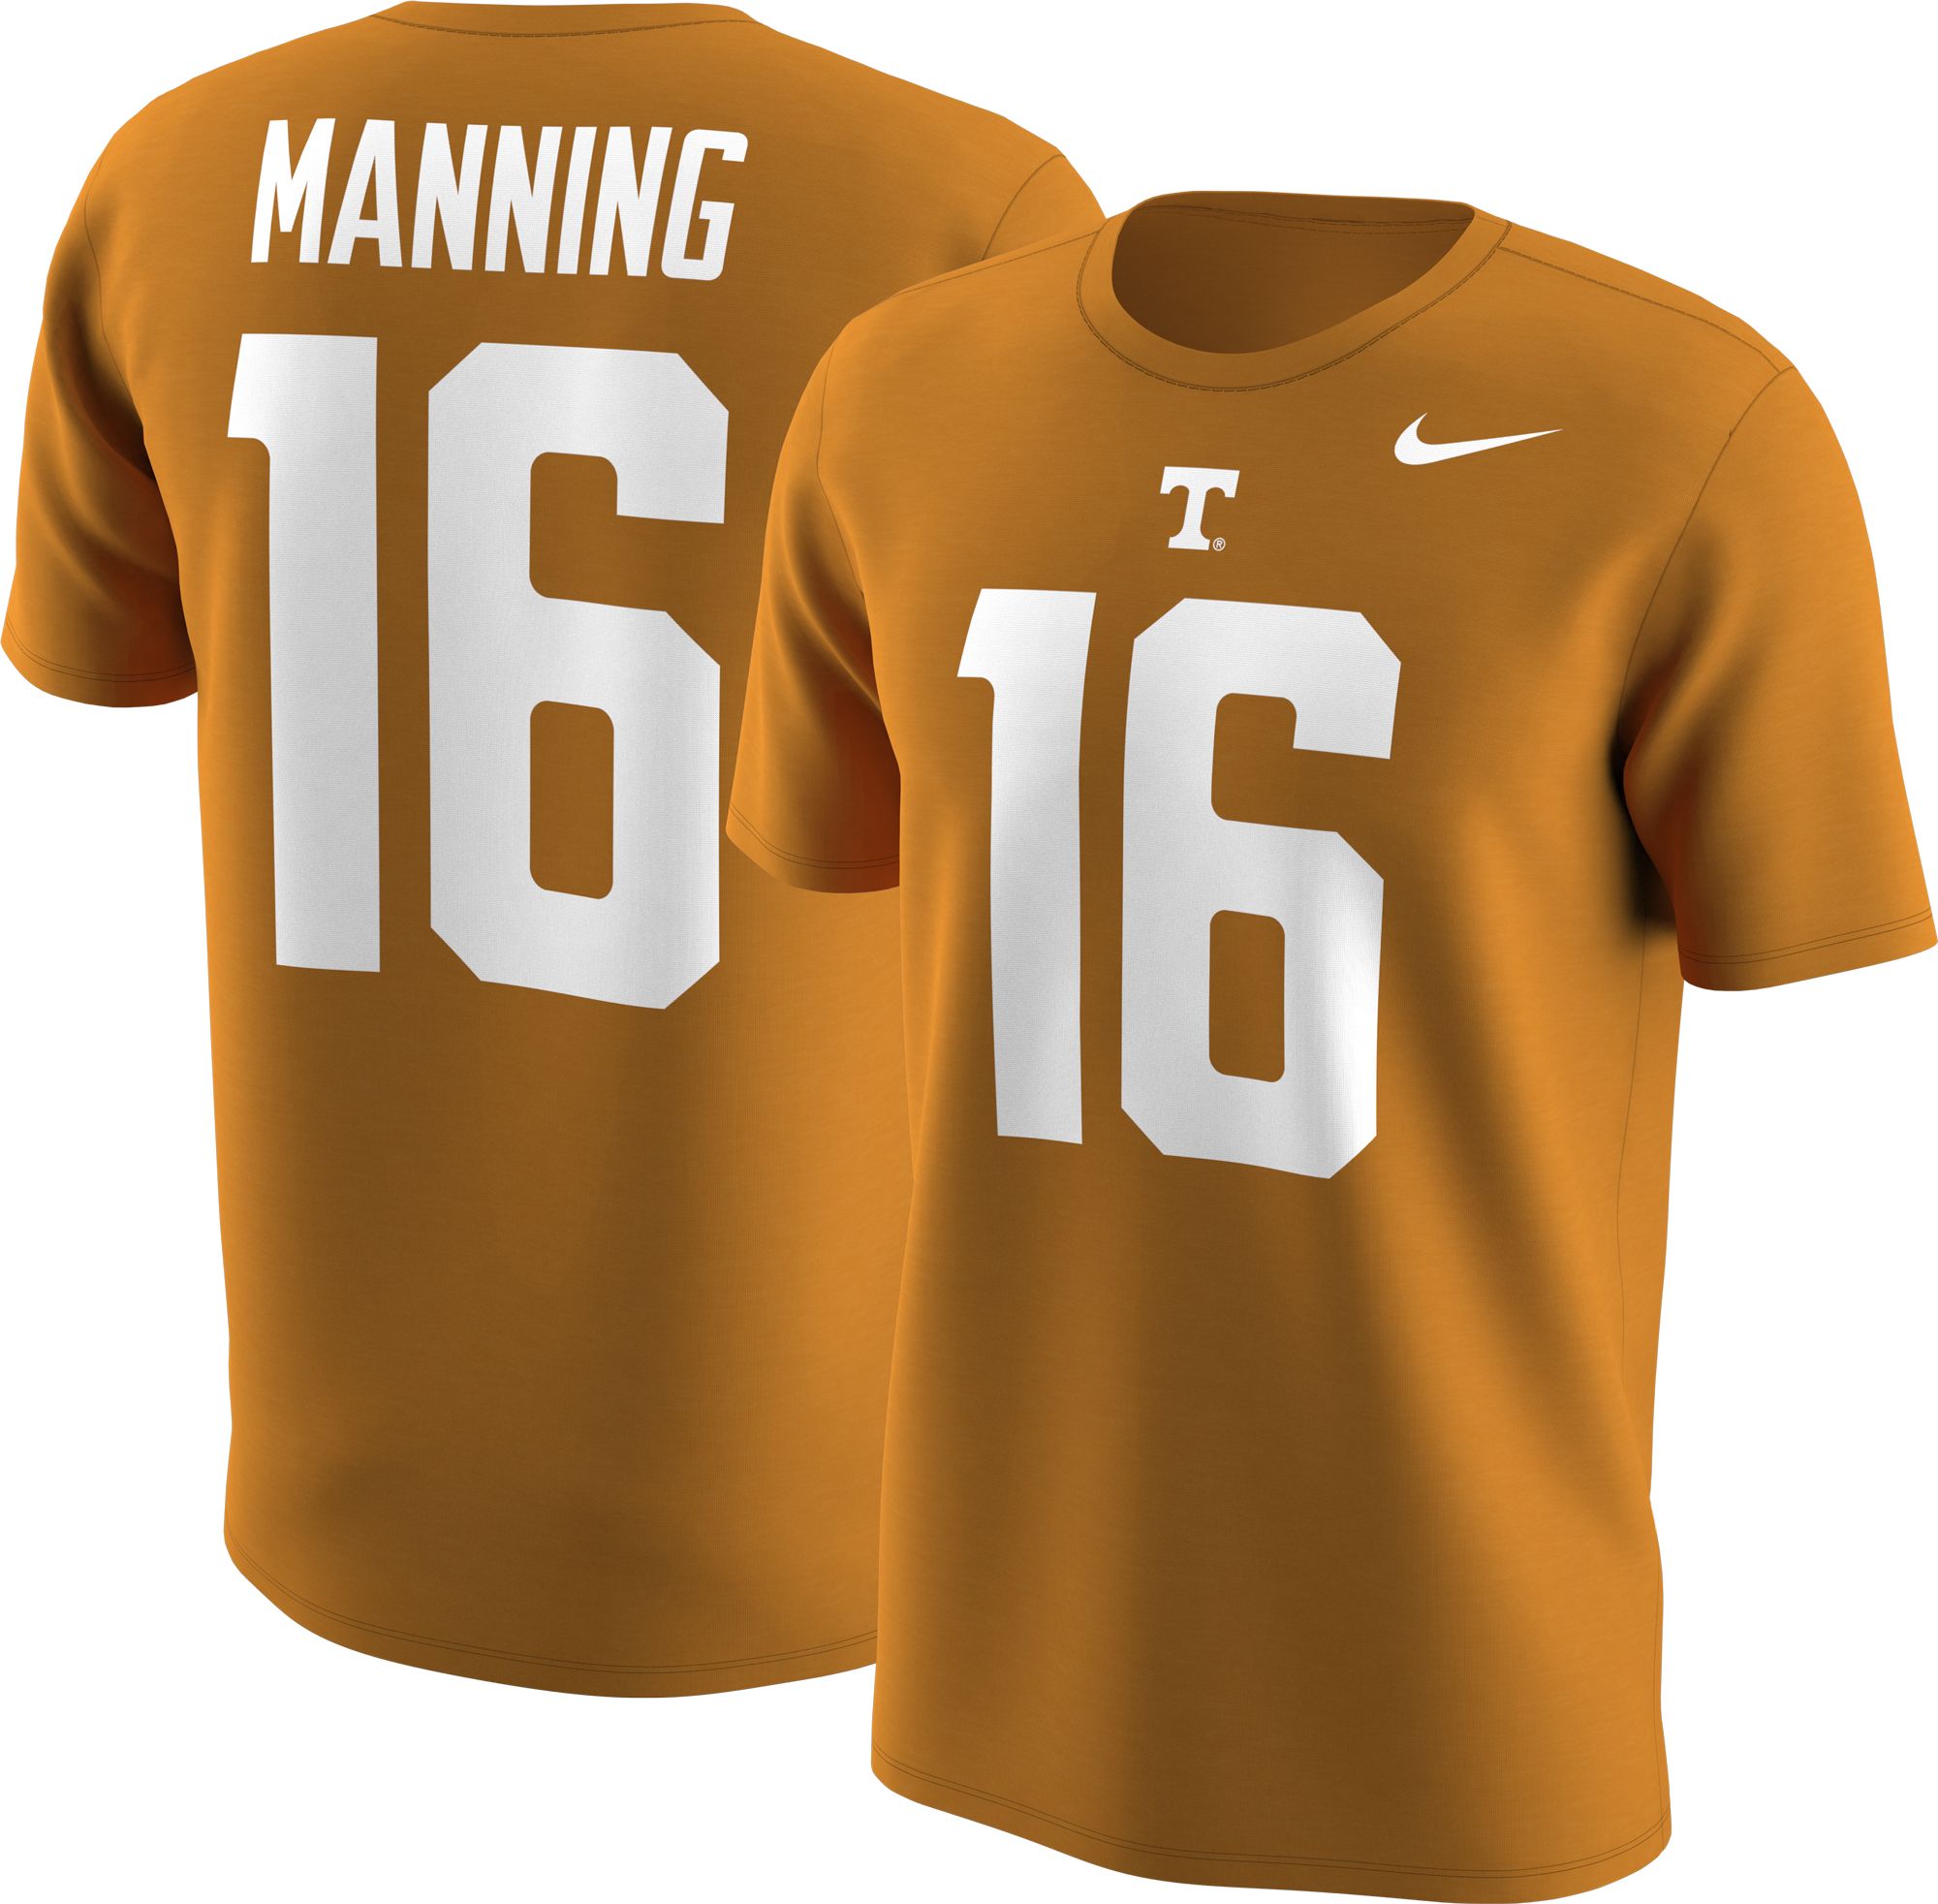 tennessee vols jersey